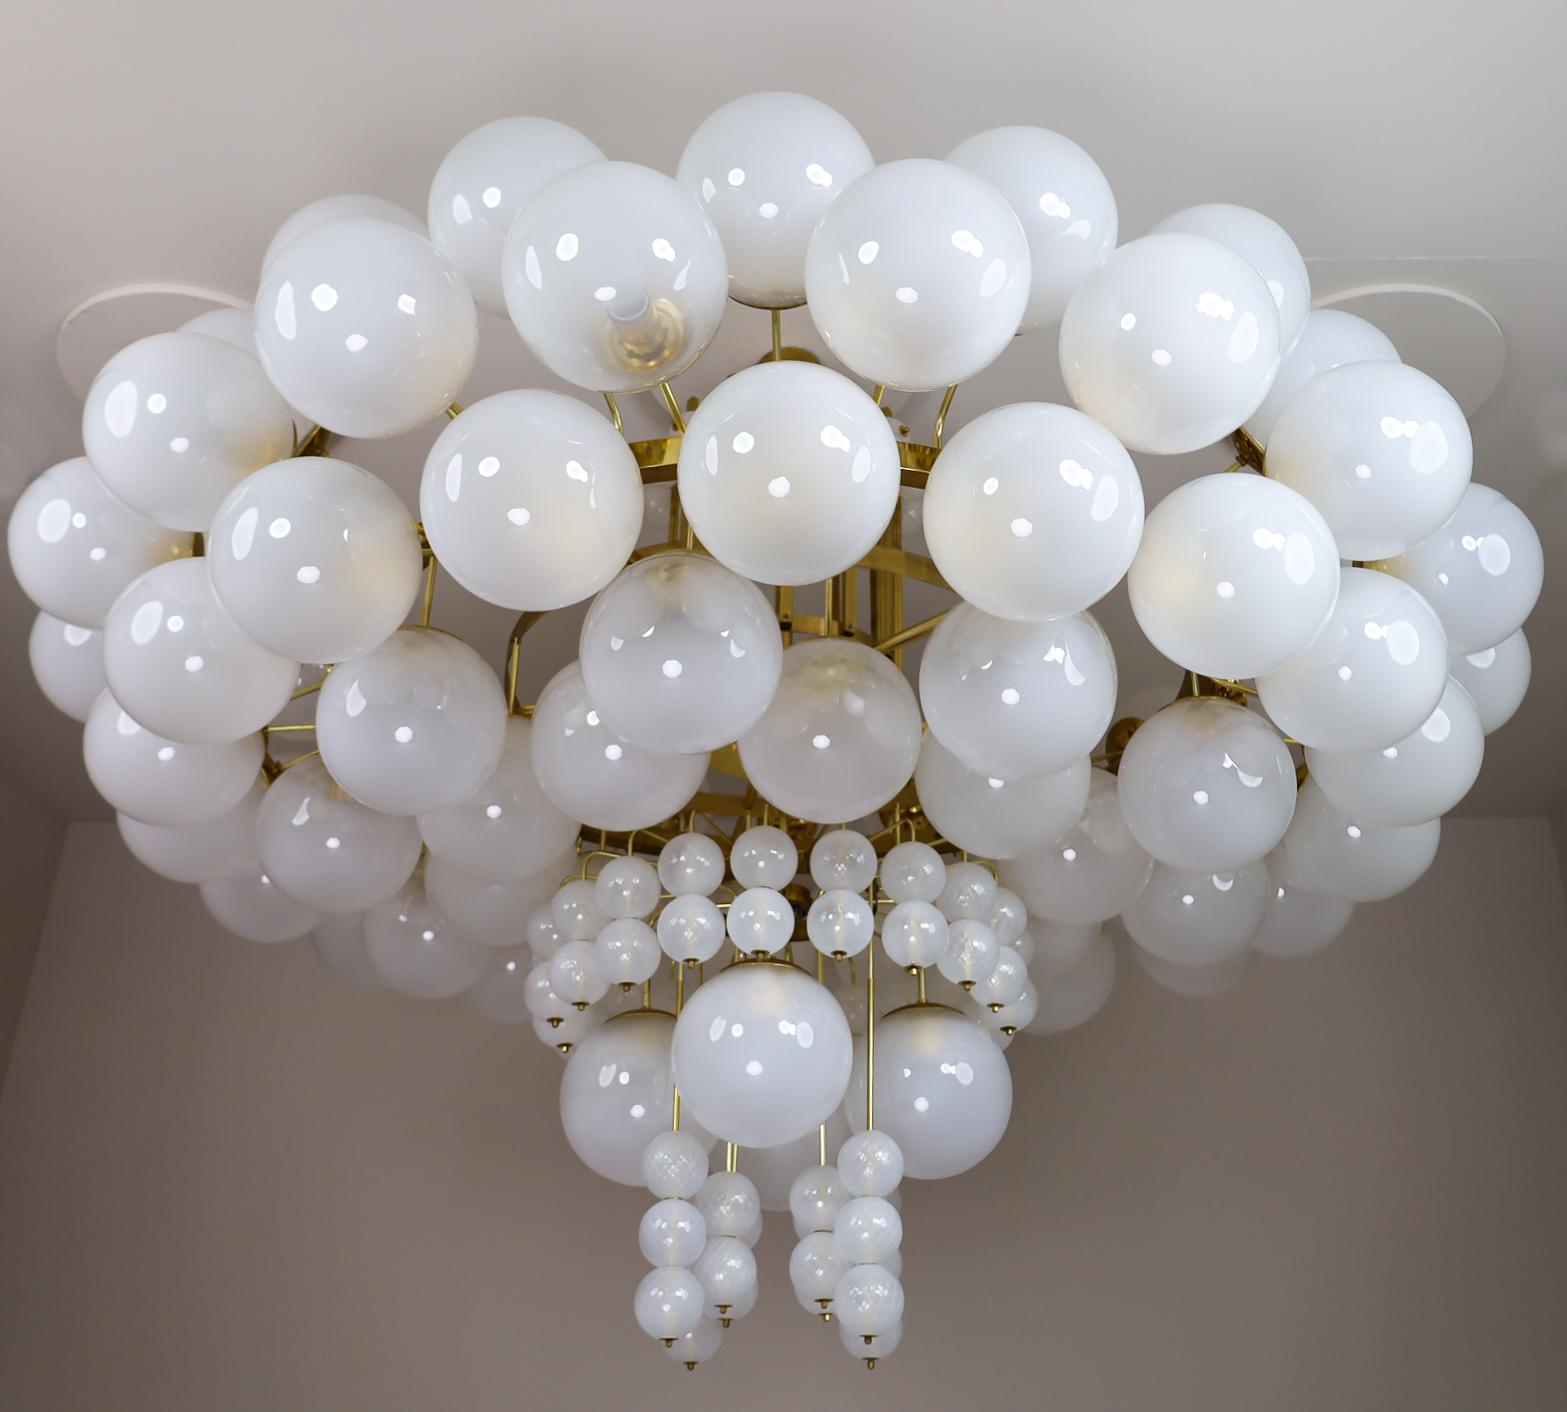 Czech XXL Hotel Chandelier with Brass Fixture and Hand-Blowed Frosted Glass Globes